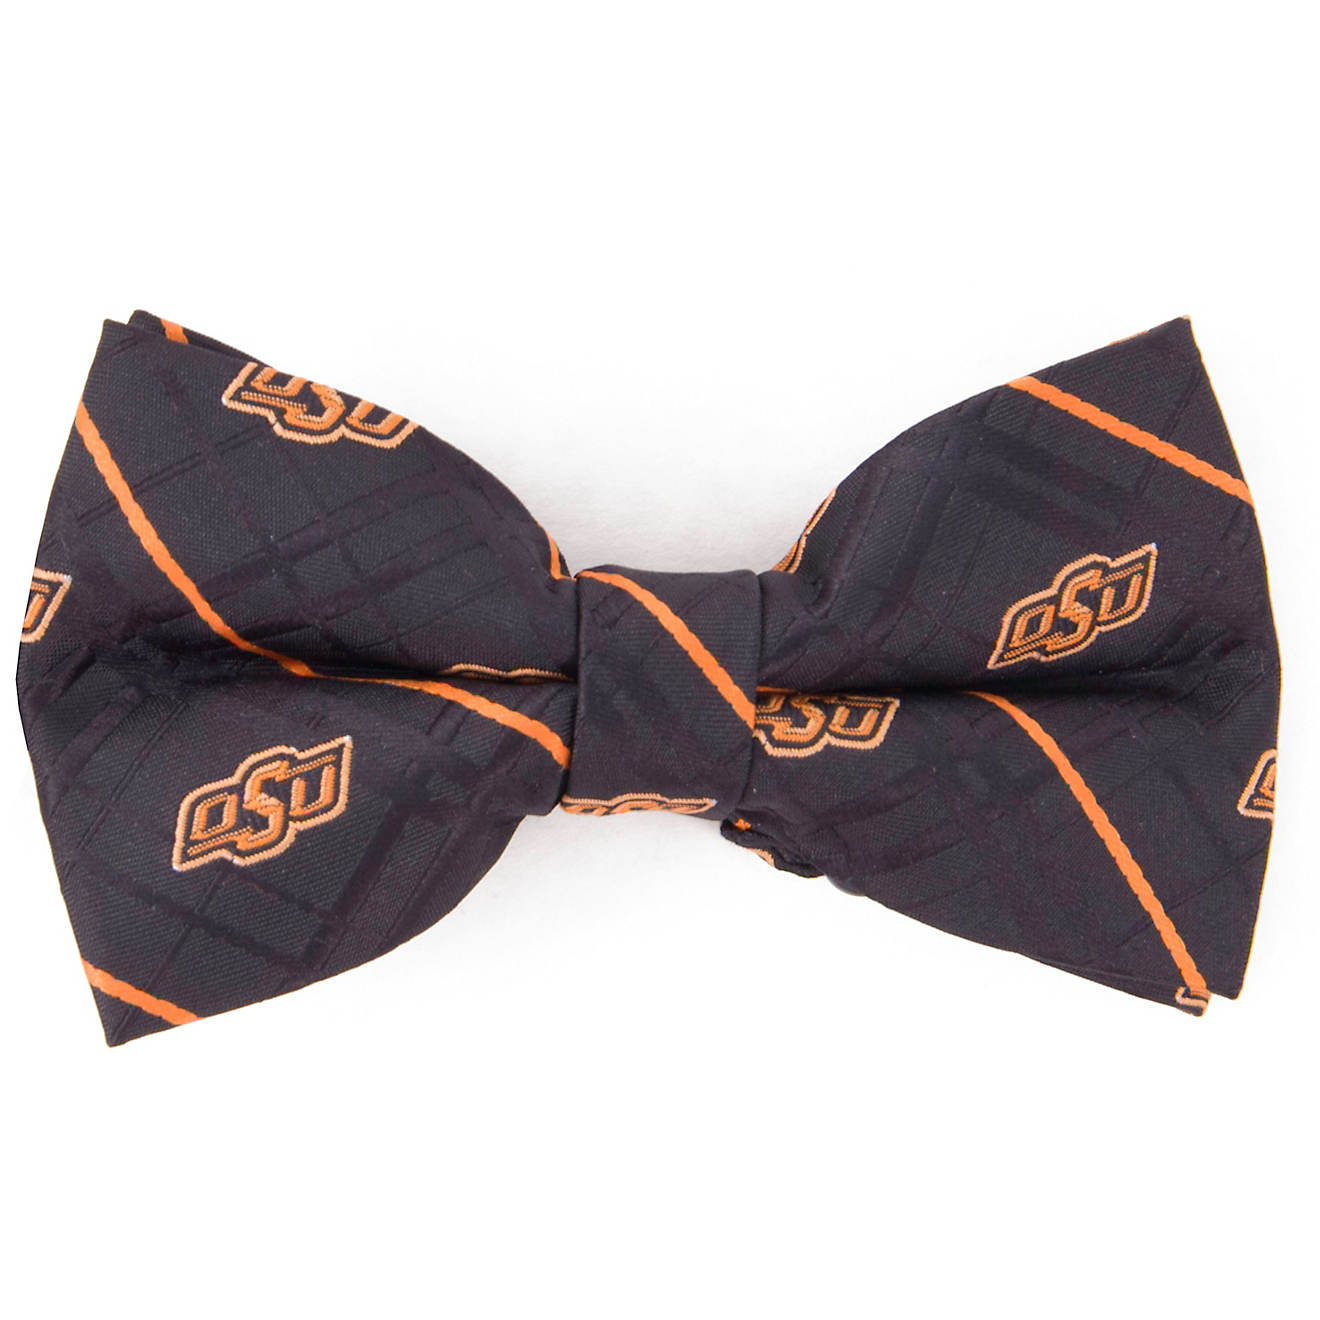 Eagles Wings Oklahoma State University Bow Tie 